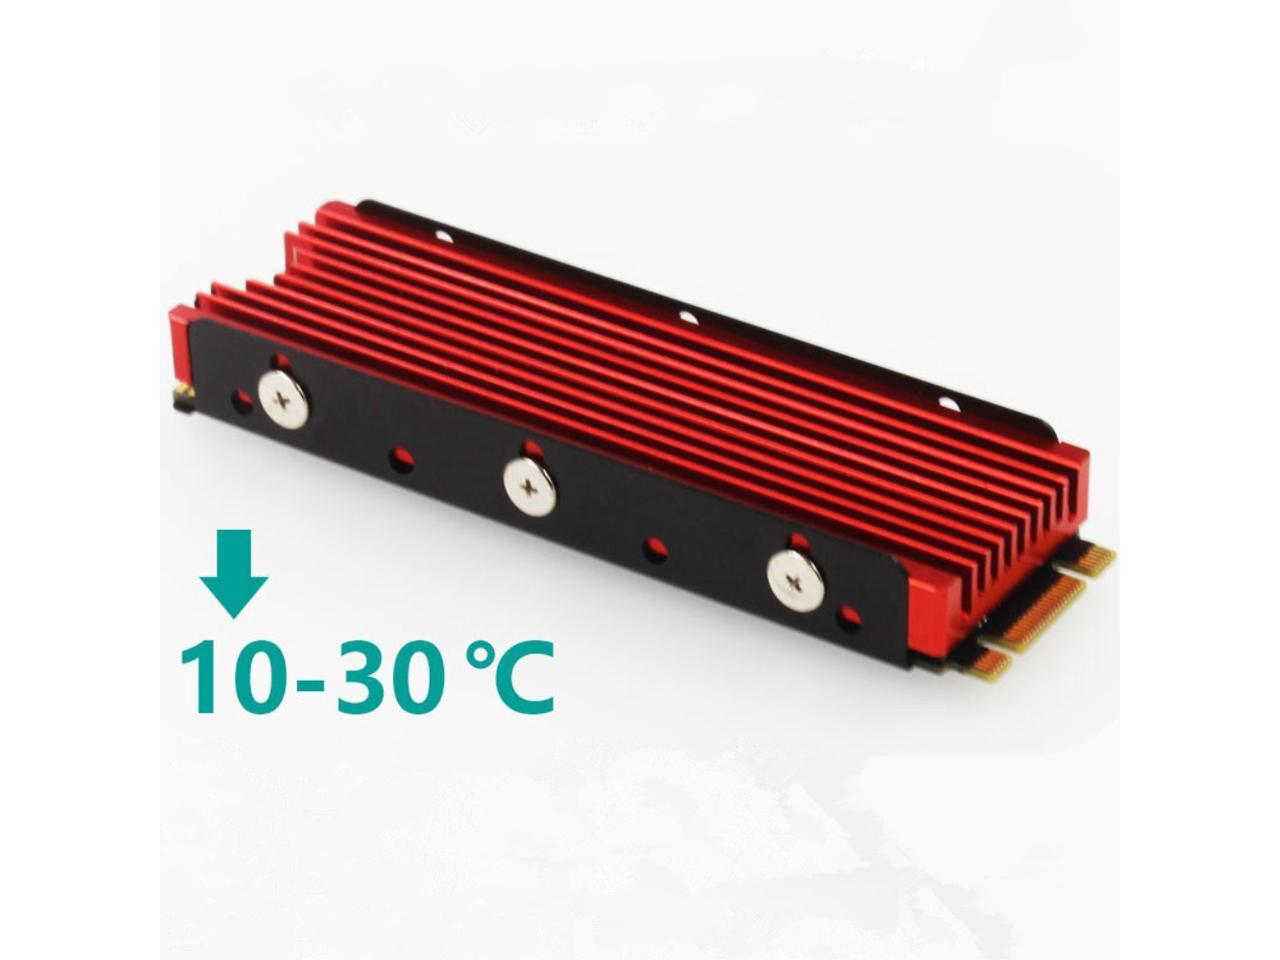 Aluminum Heatsink Chipset Heat Sink,with Cooling Pad,for NVME NGFF M.2 2280 PCIE SSD 